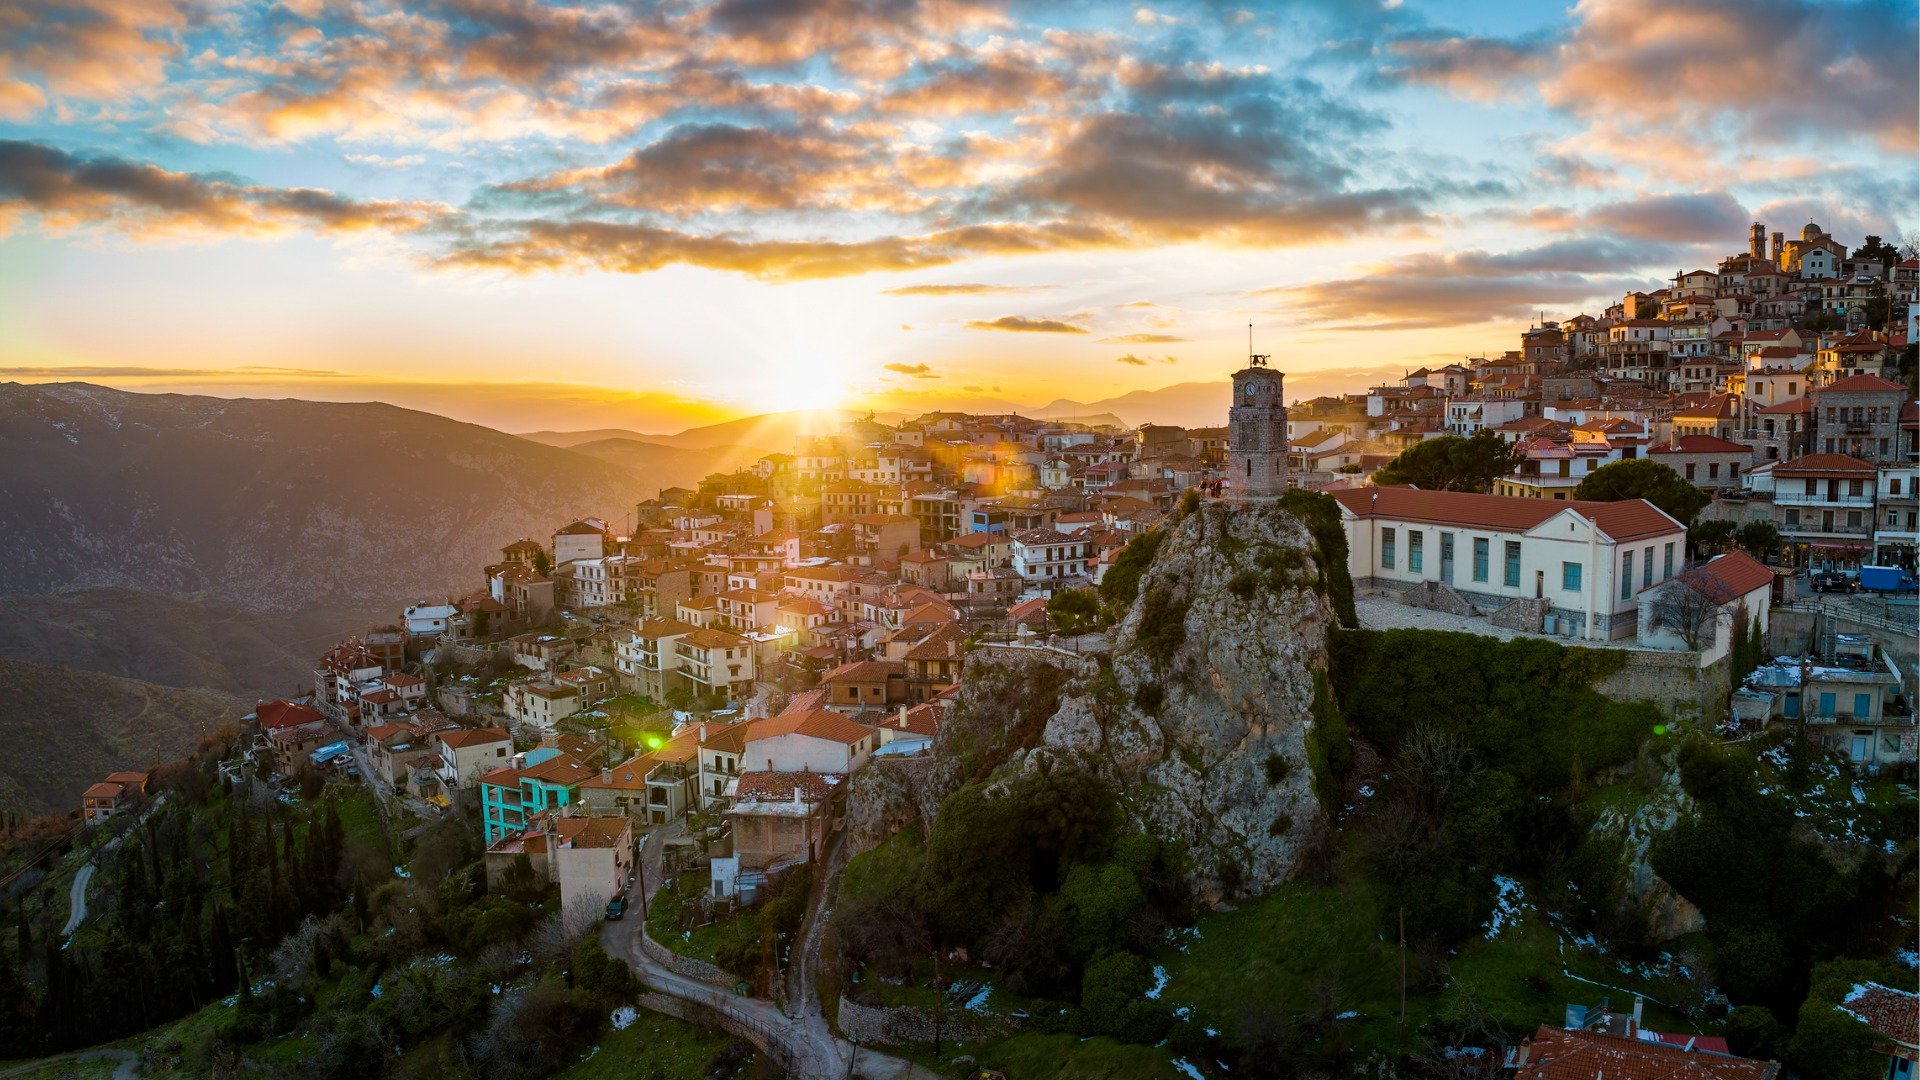 This image shows the sun setting over Arachova and its red-tiled roofs. 